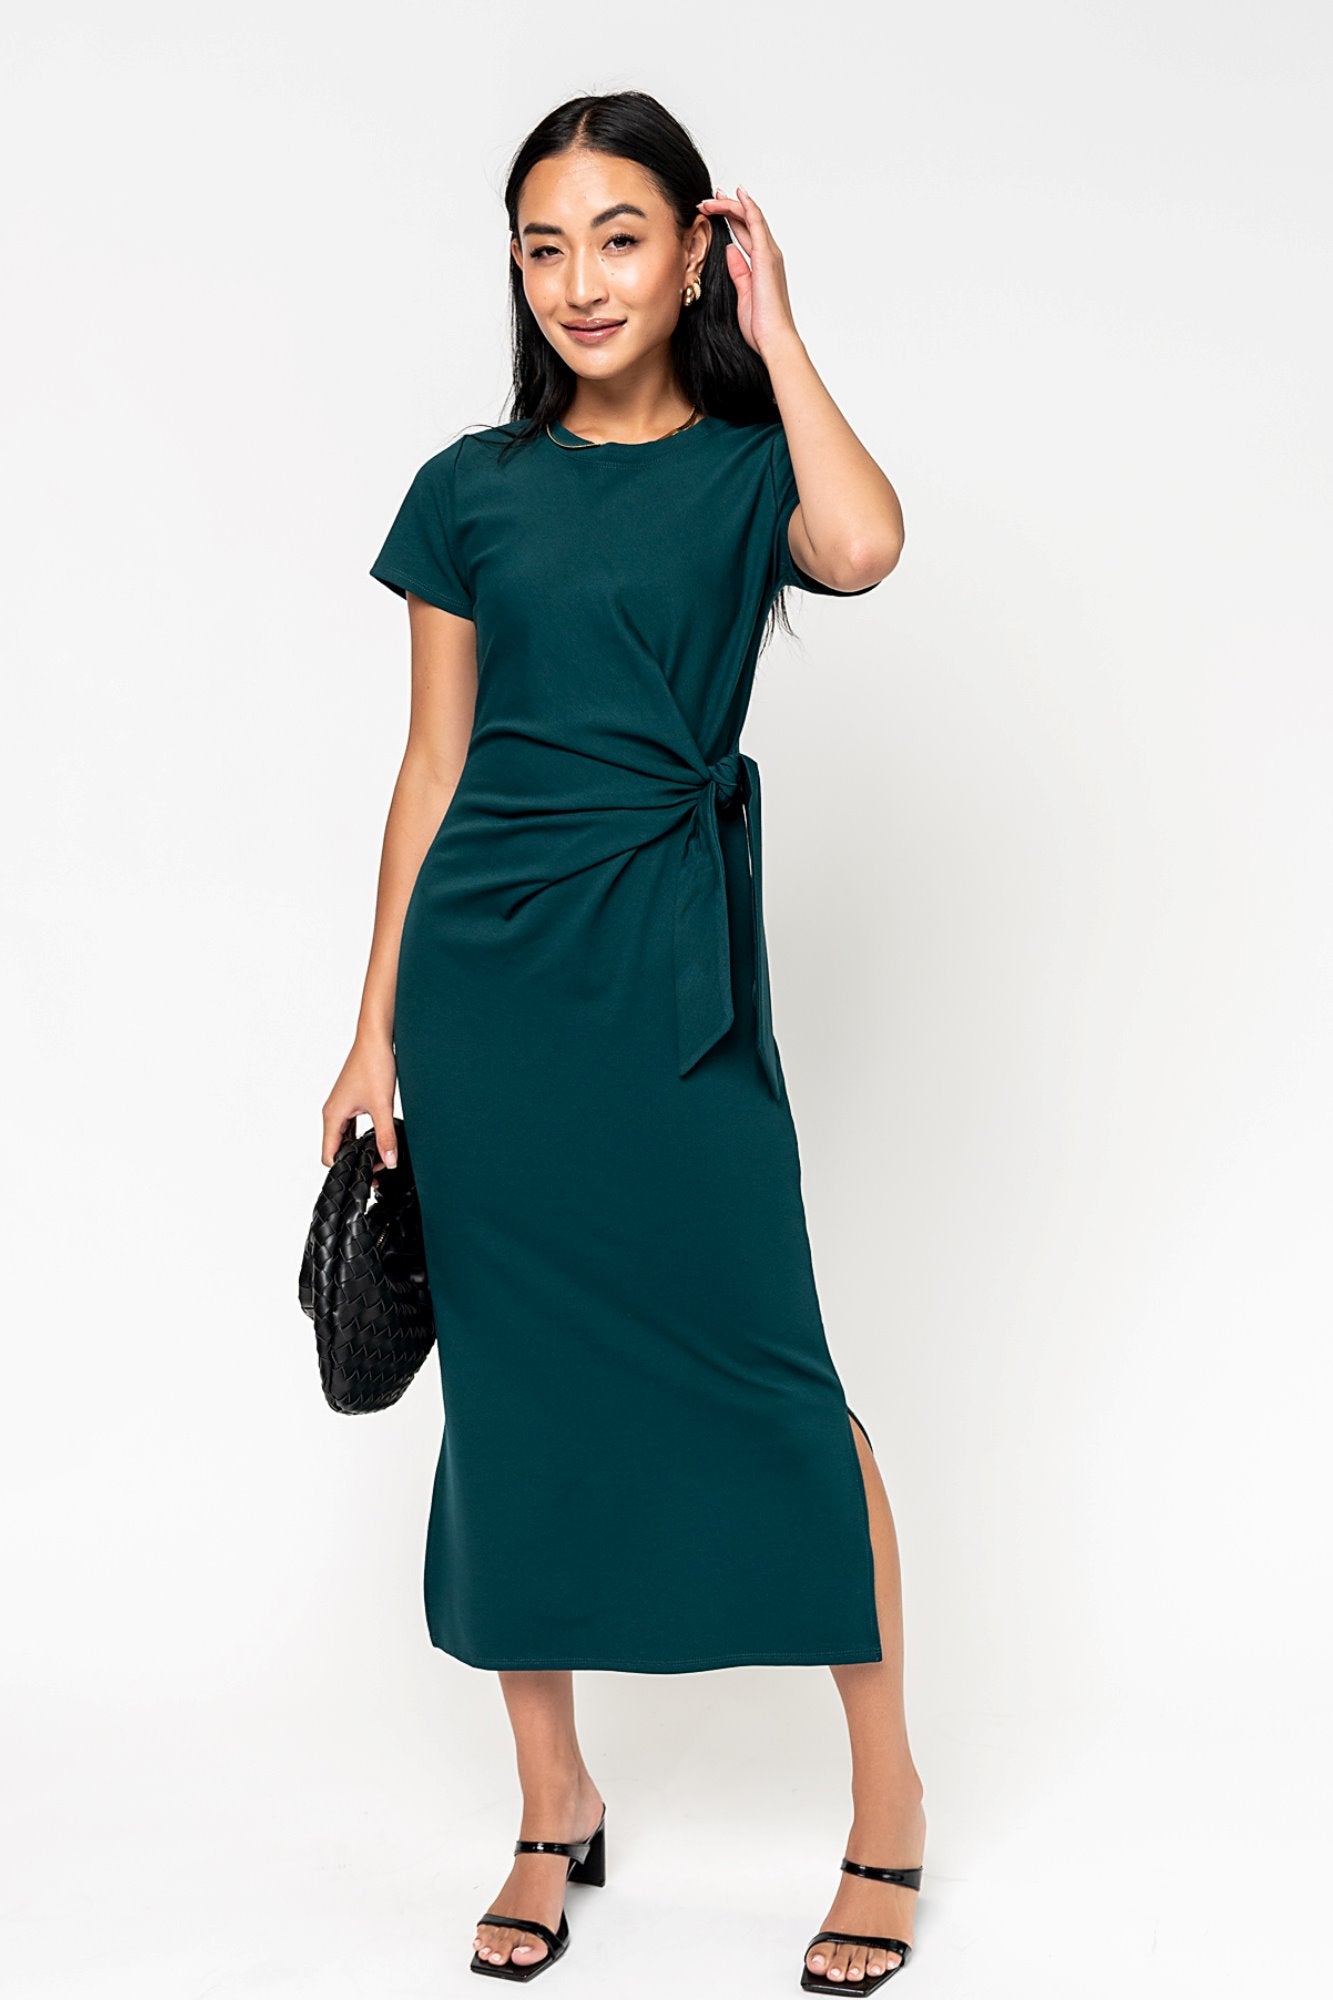 Starling Dress in Evergreen (Small-XL) Holley Girl 